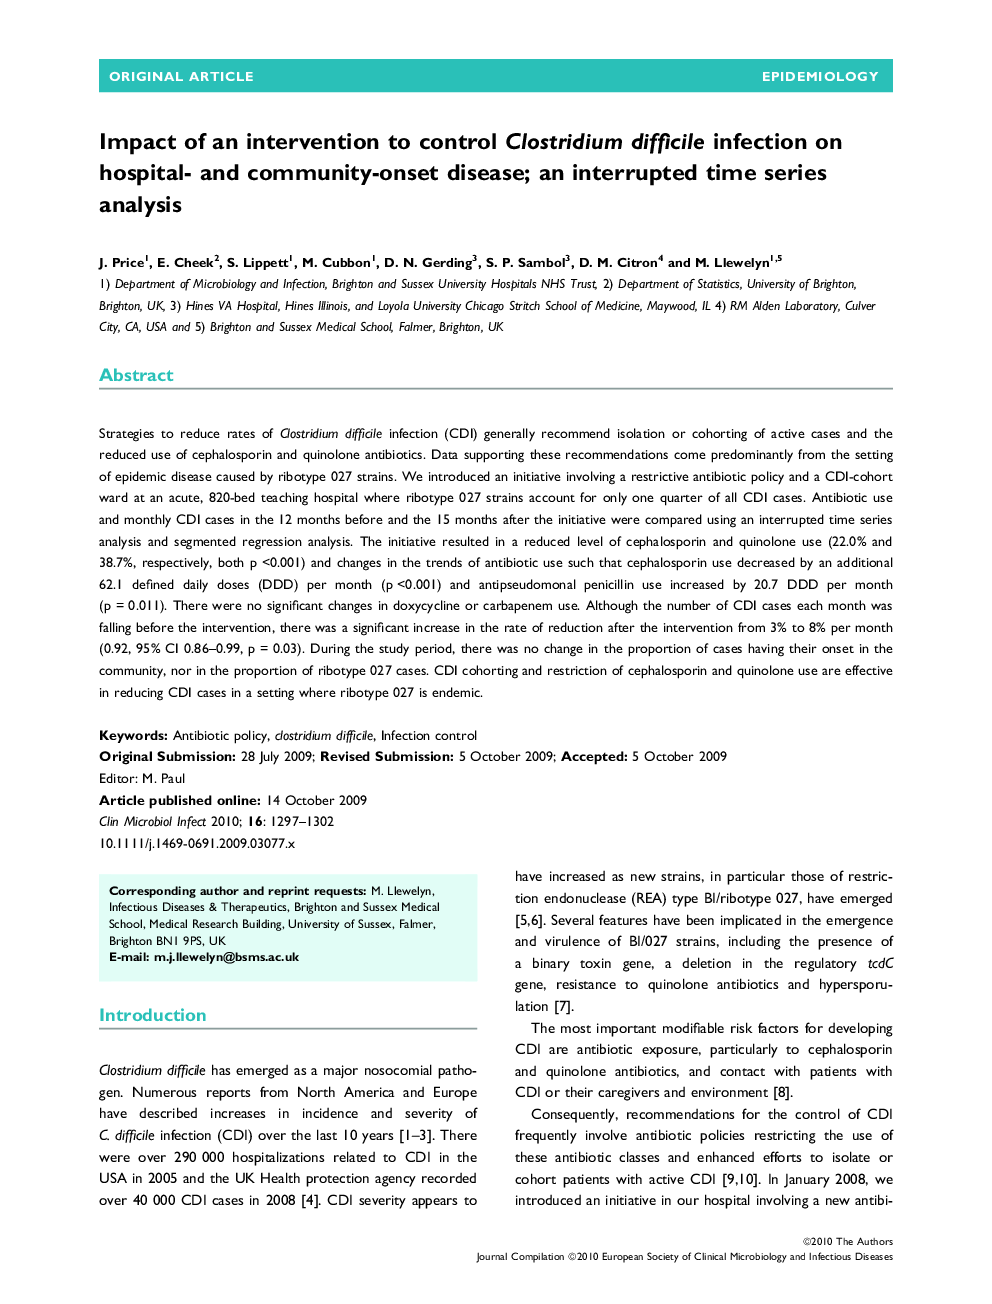 Impact of an intervention to control Clostridium difficile infection on hospital- and community-onset disease; an interrupted time series analysis 